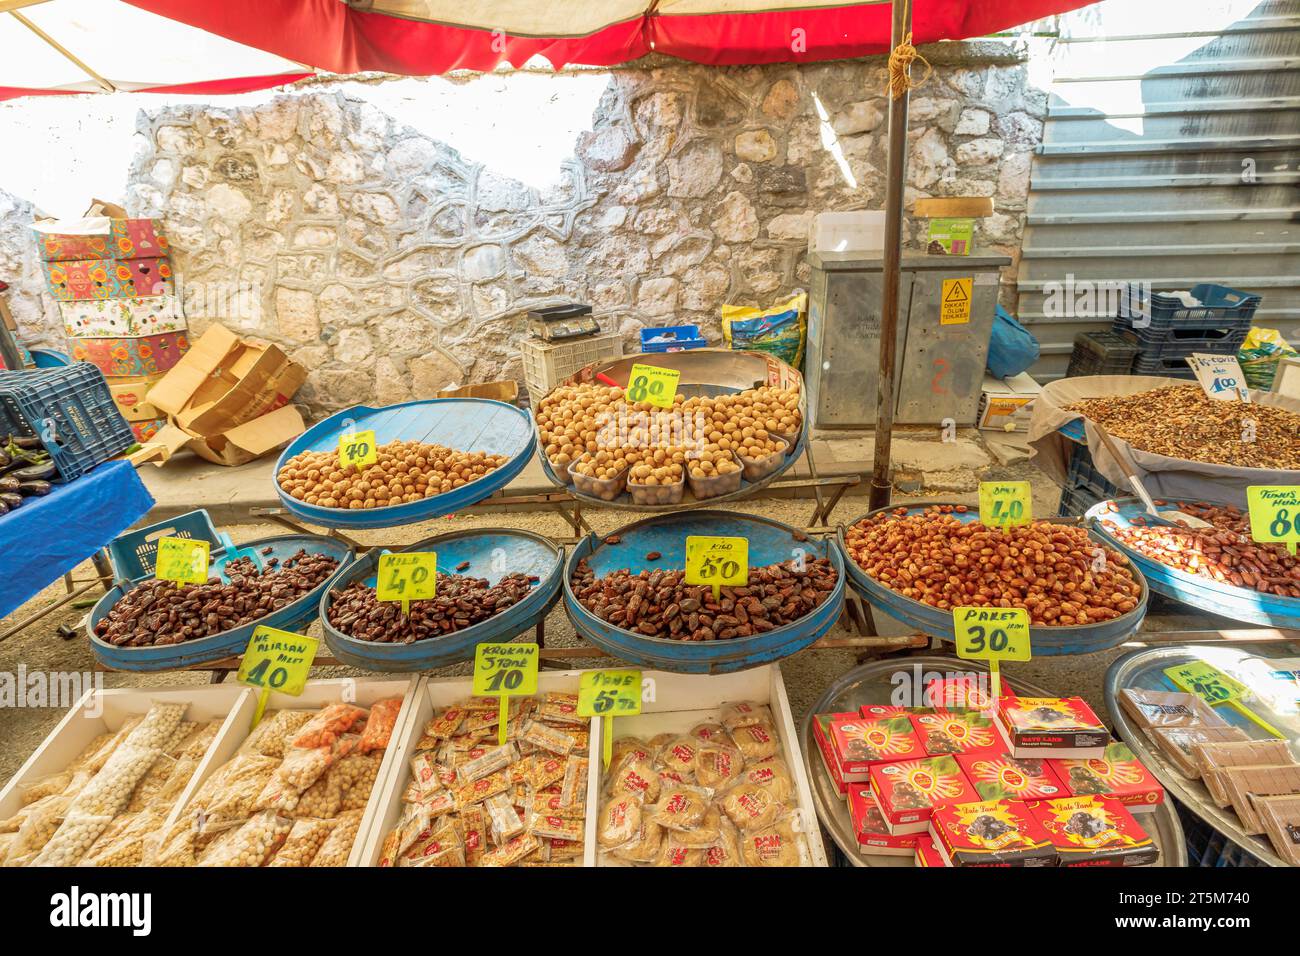 Eskisehir, Turkey - Aug 2, 2023: The historic fruit market in Eskisehir, with stalls brimming with fresh produce, a sensory delight of vibrant colors Stock Photo